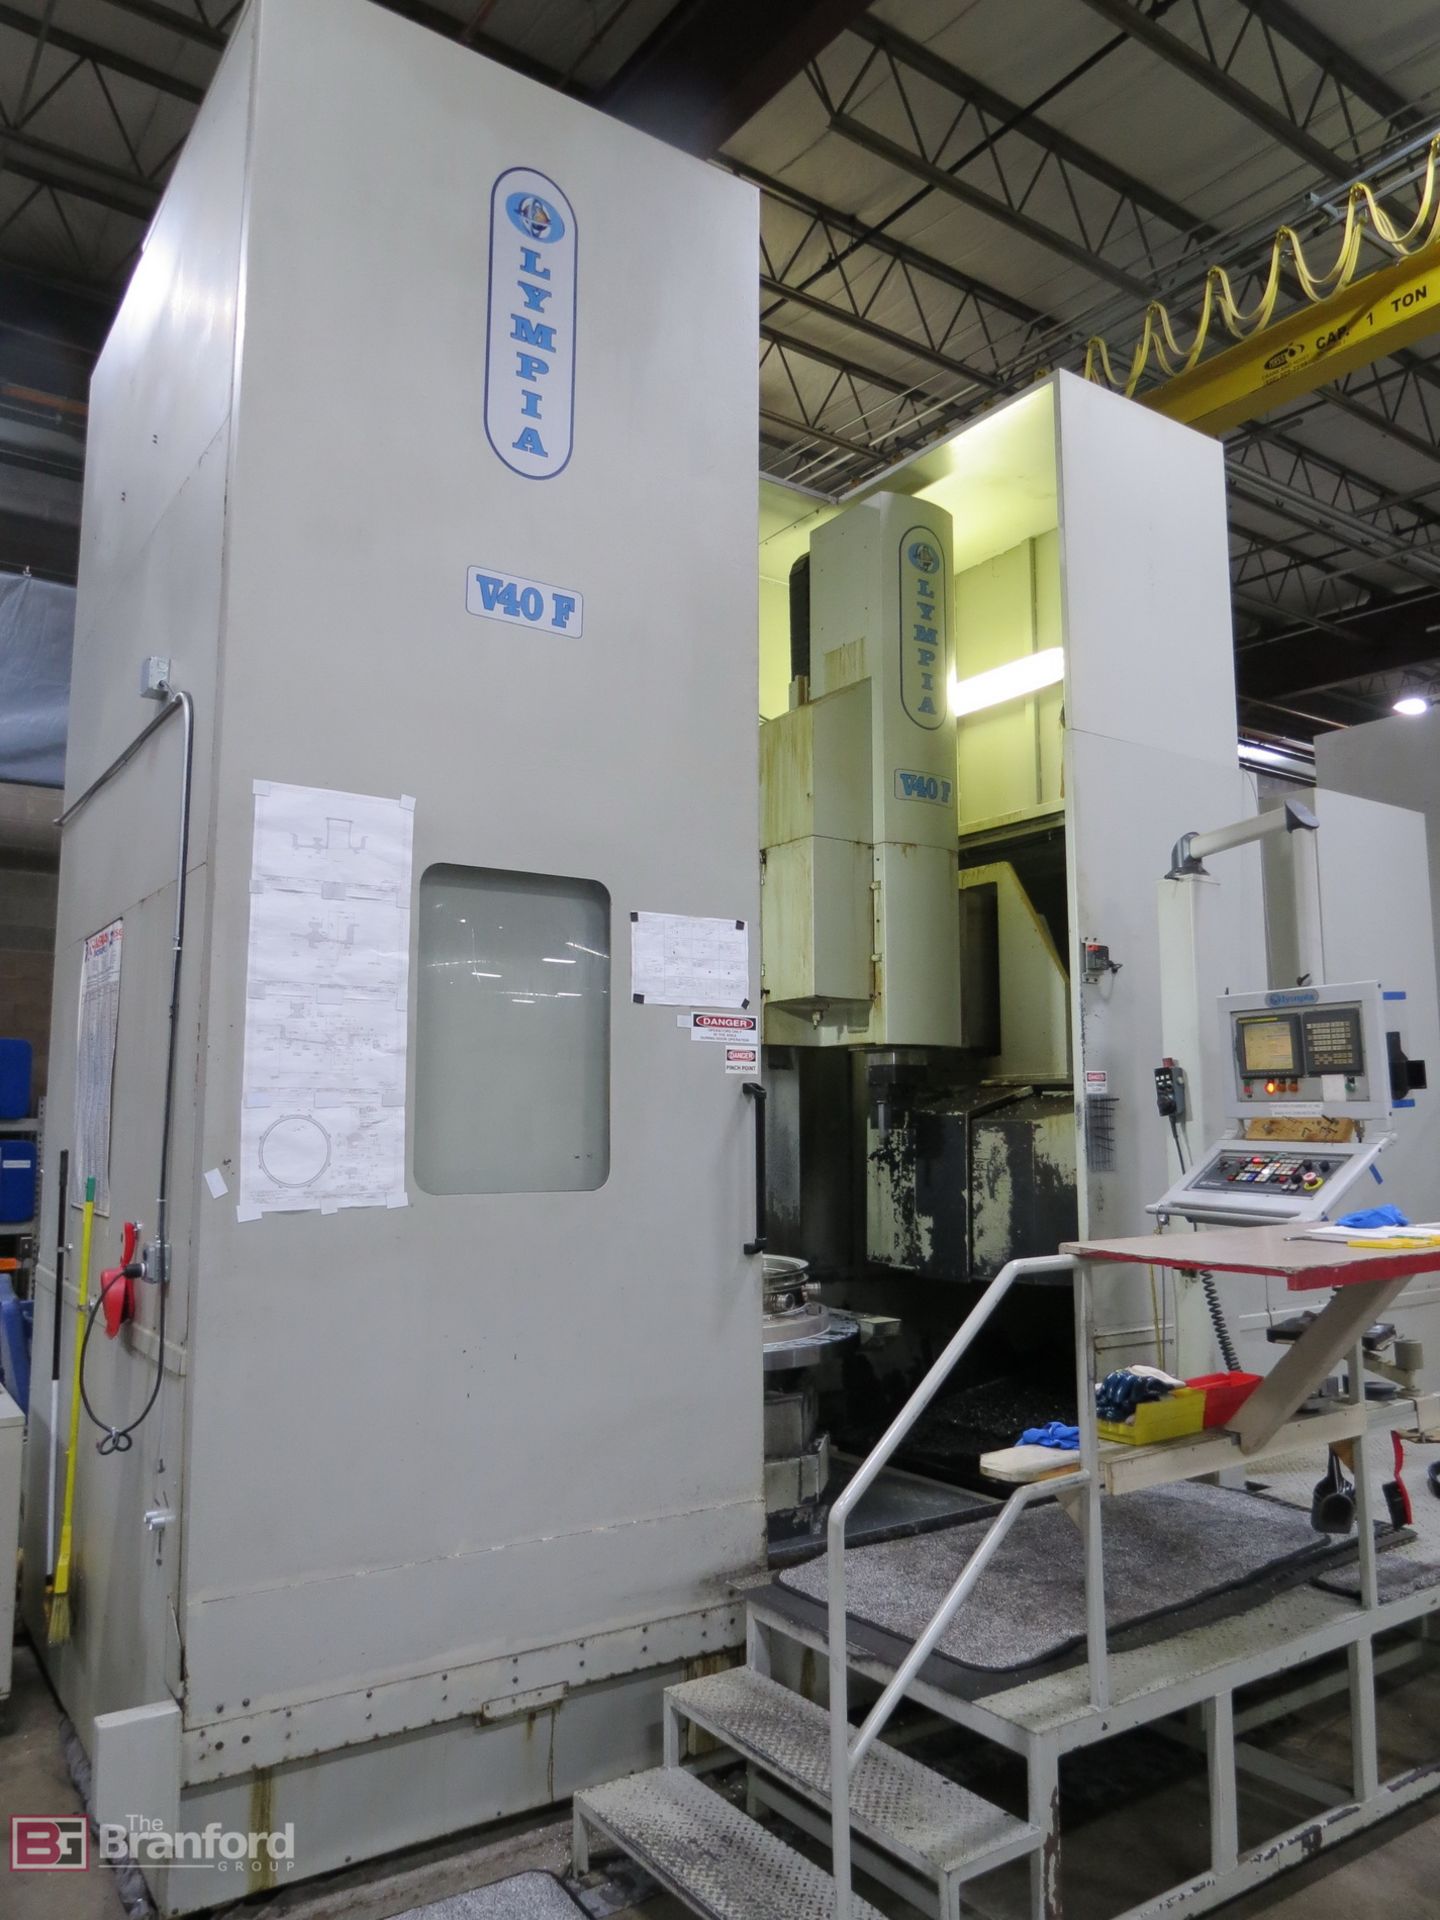 Olympia V40-PF CNC Vertical Turning Center